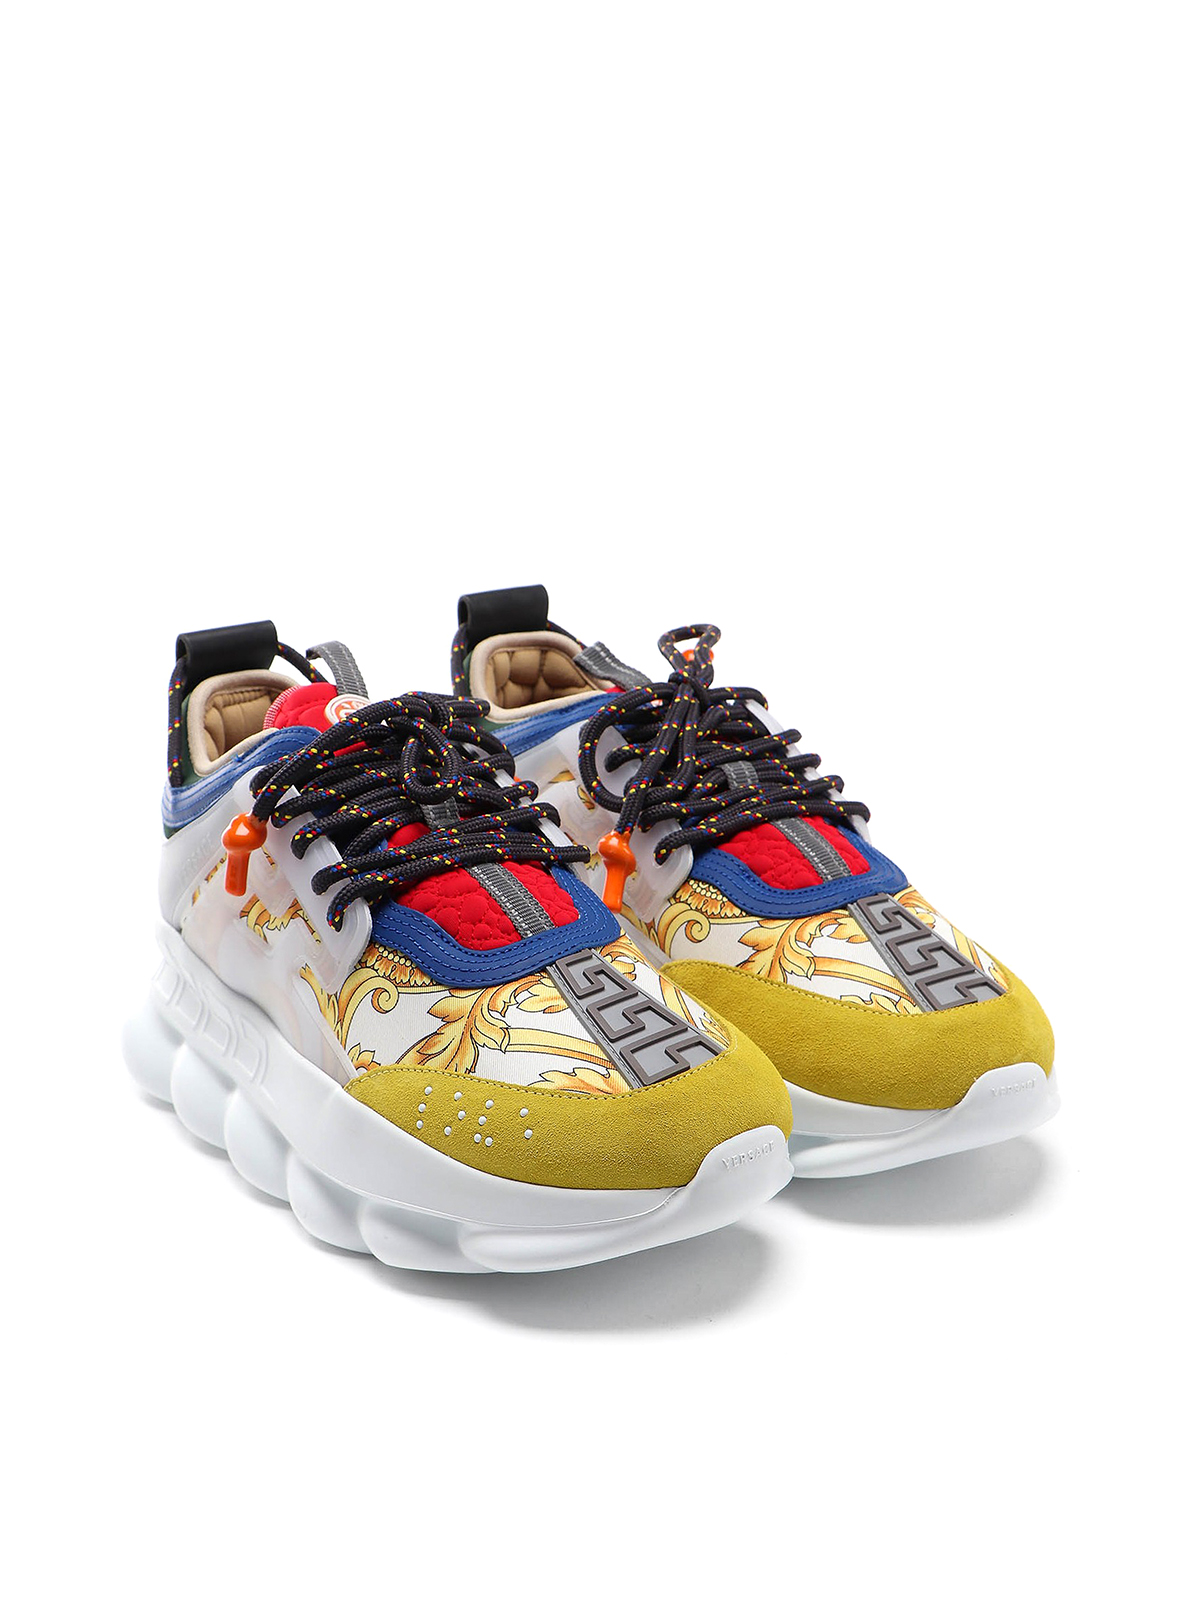 Chain Reaction sneakers, Versace